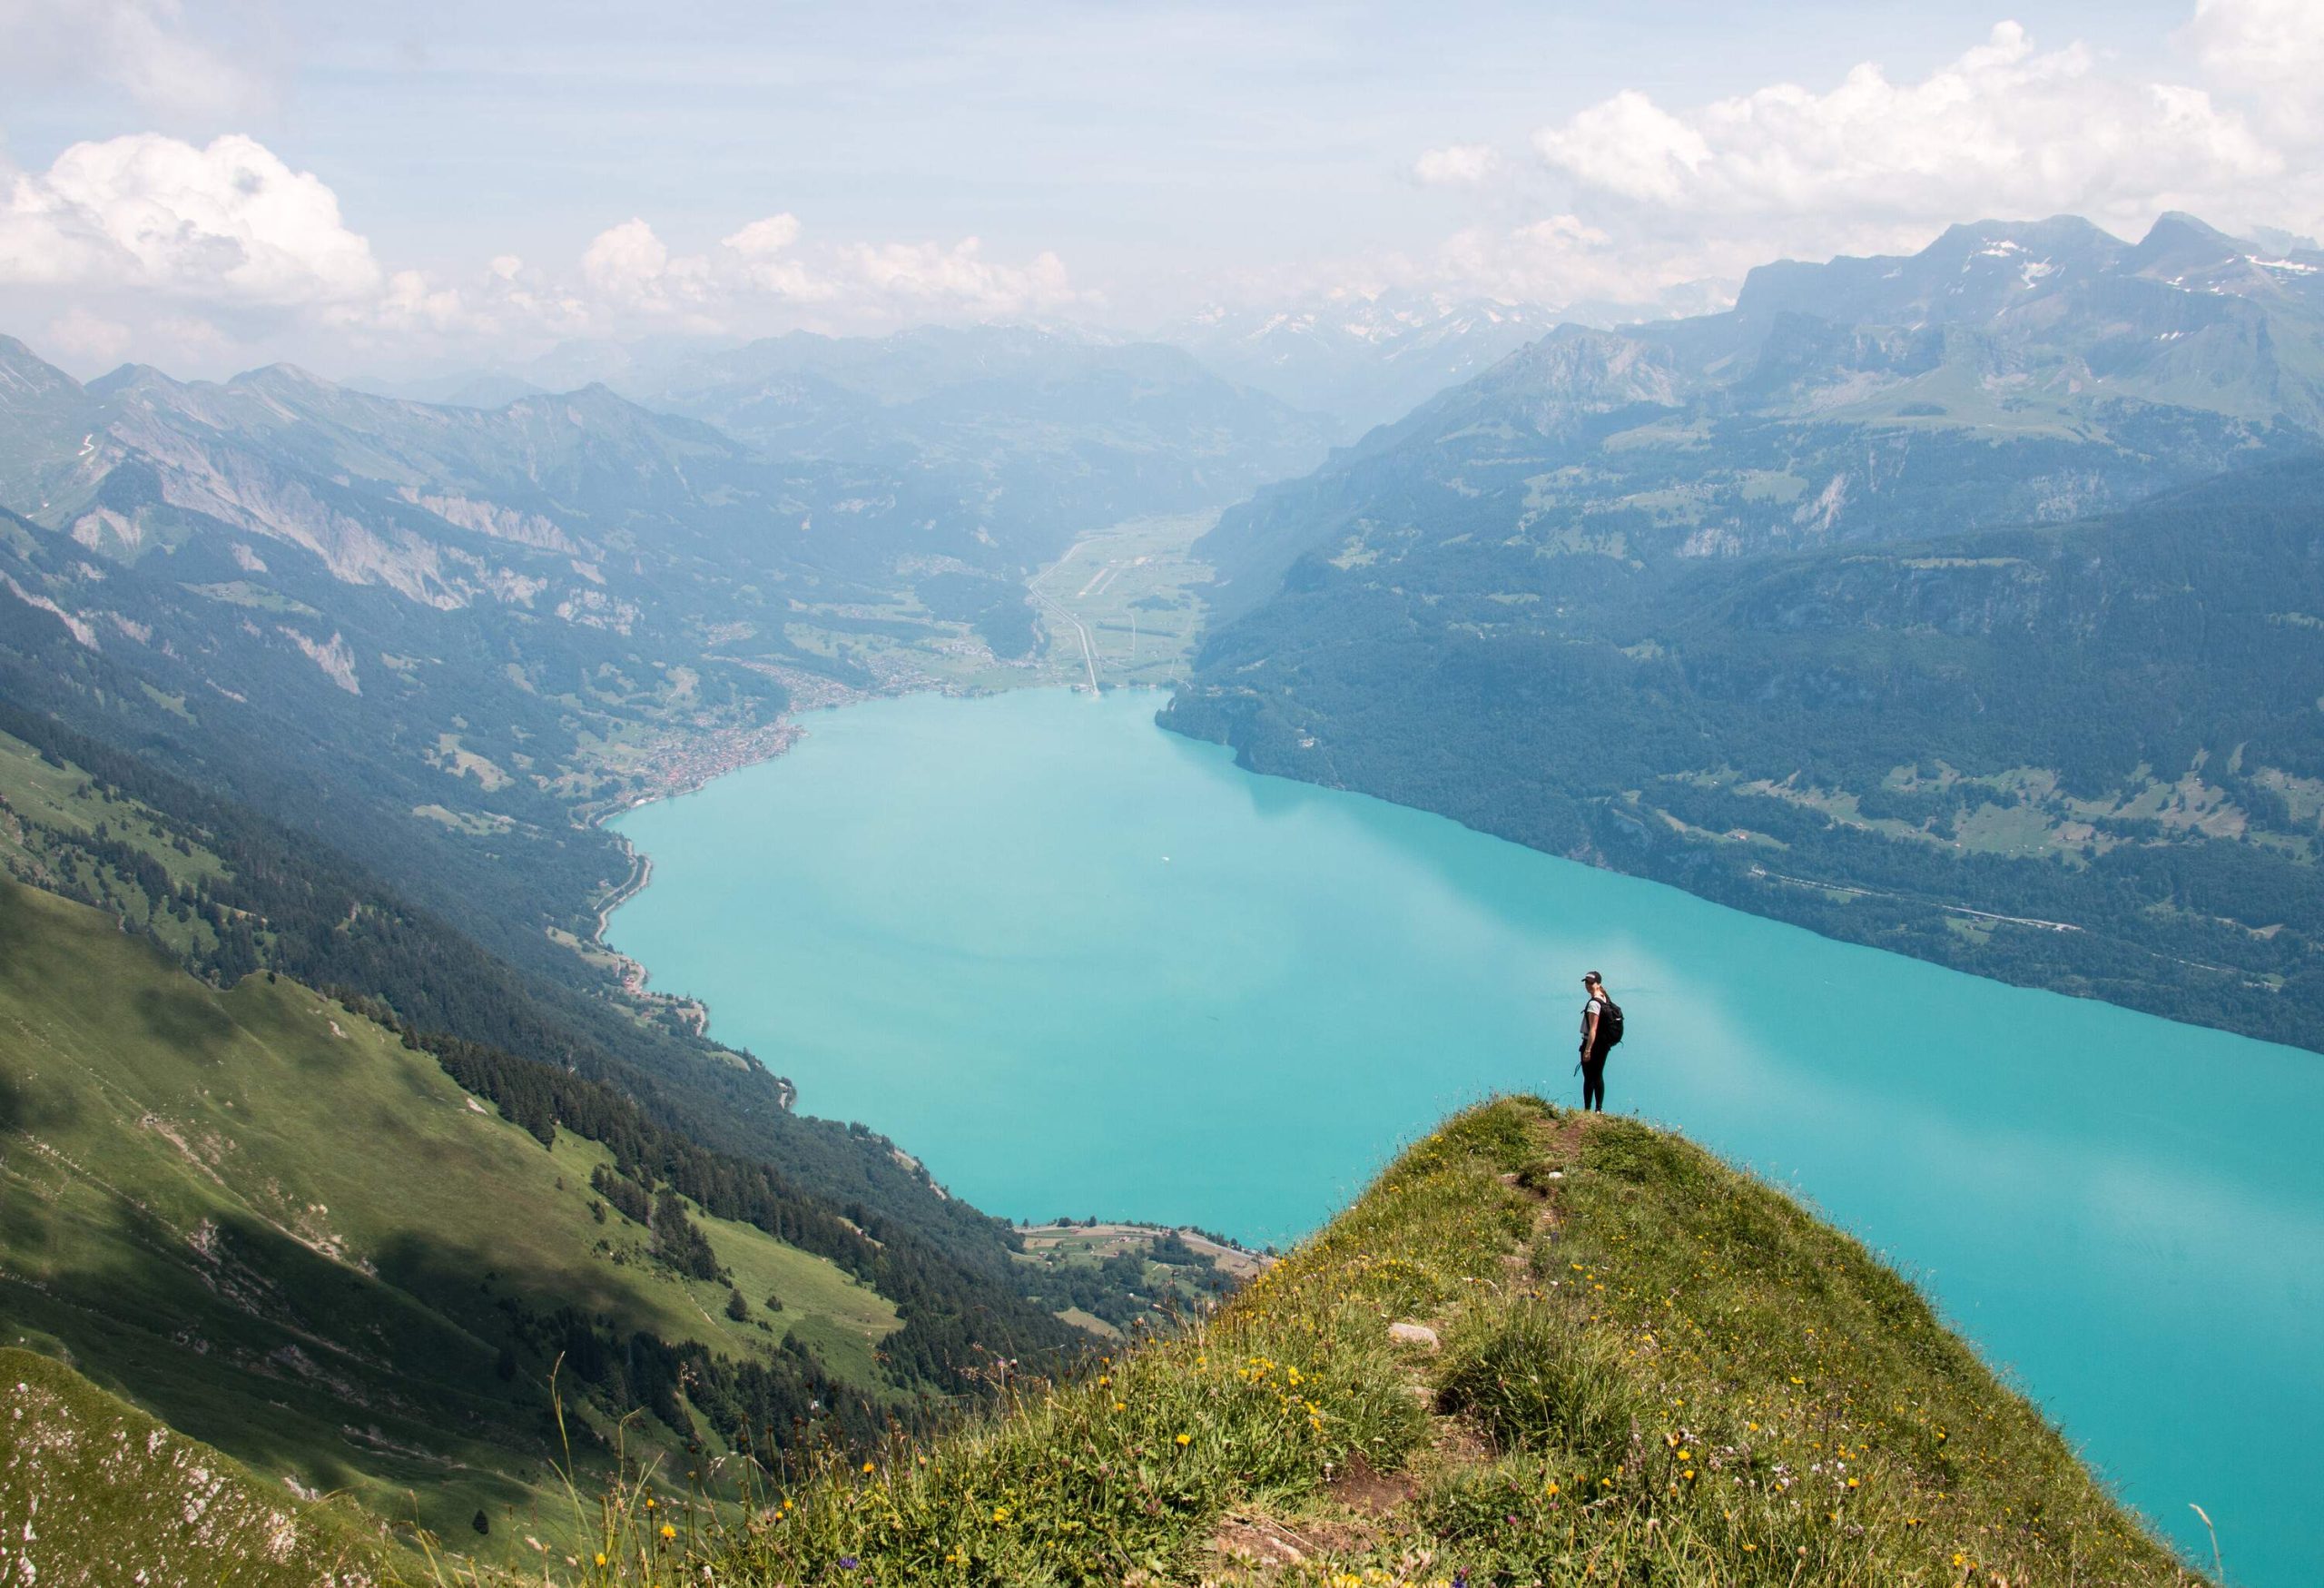 A female hiker standing on a mountaintop with epic views of a blue lake and mountain ranges.